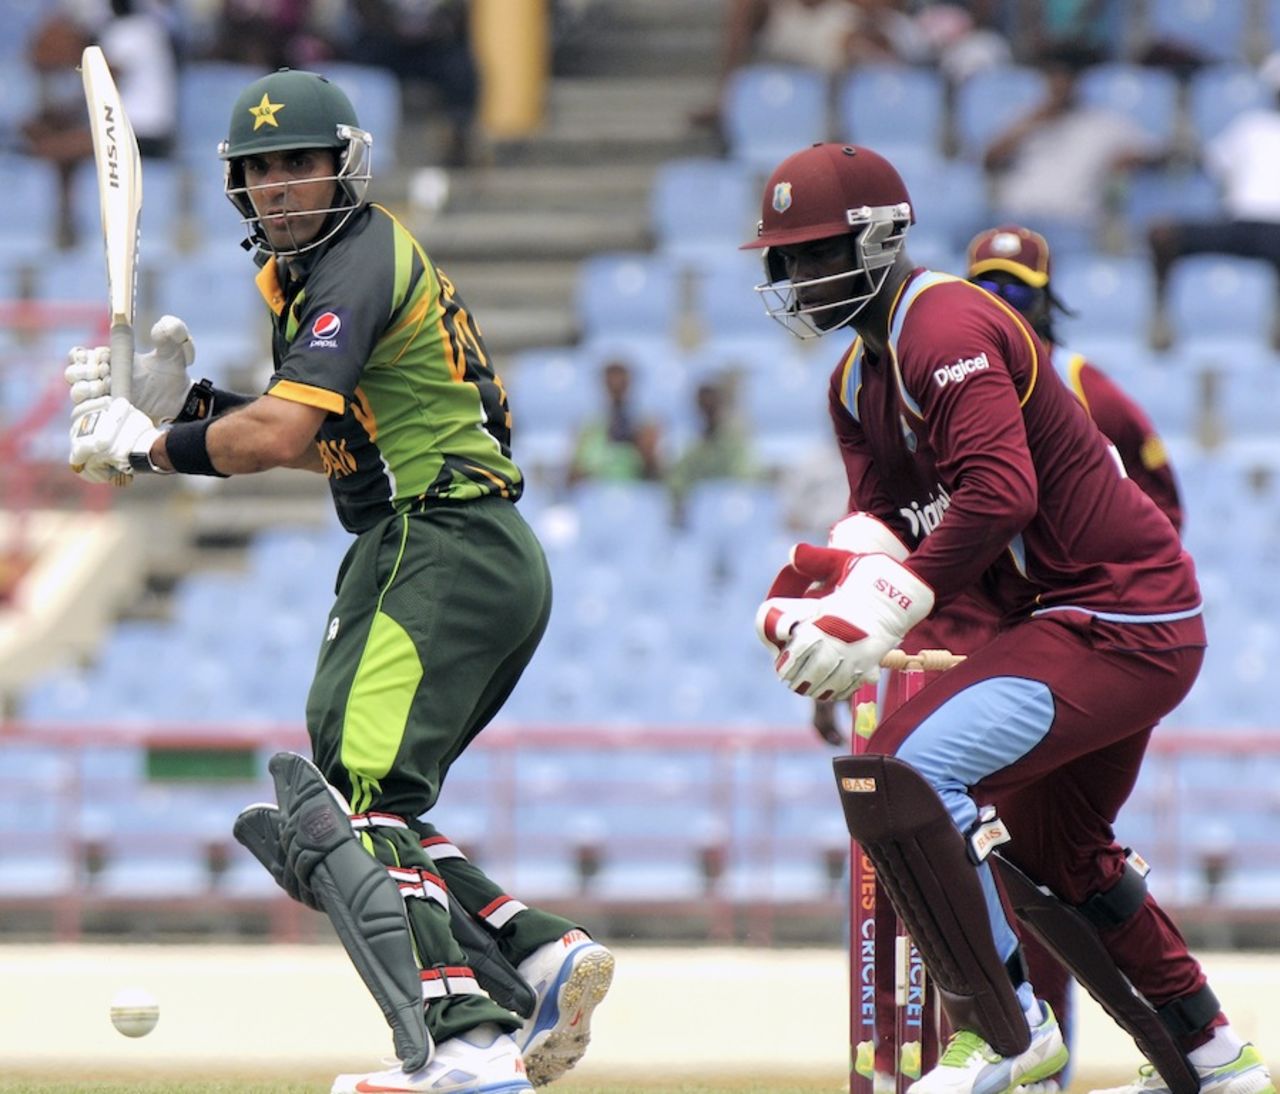 Misbah-ul-Haq nudges one to leg side, West Indies v Pakistan, 3rd ODI, St Lucia, July 19, 2013